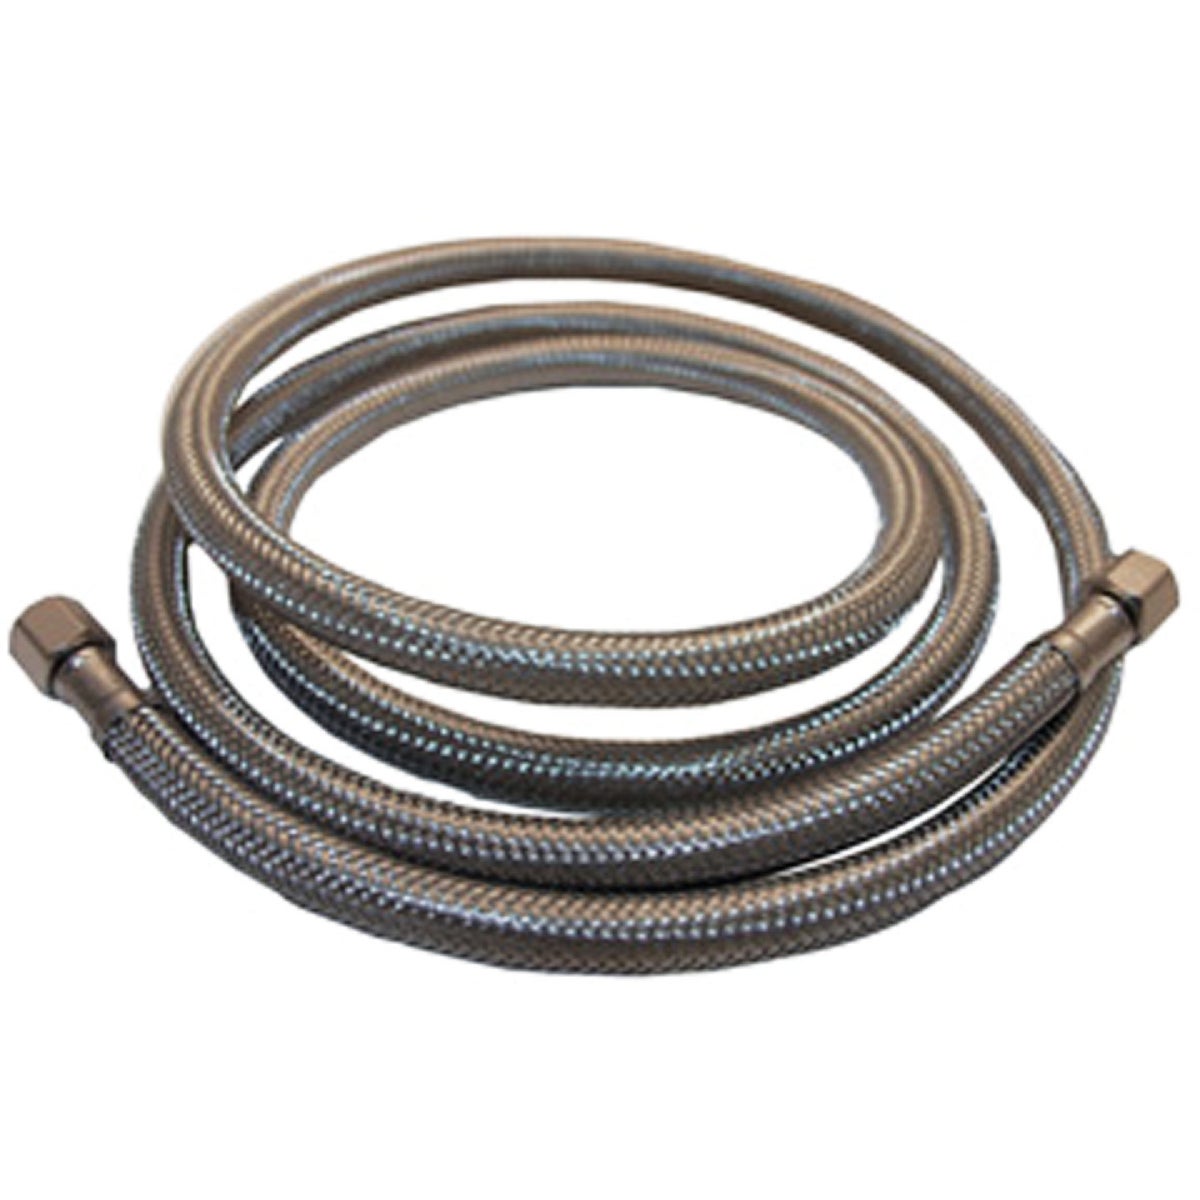 Lasco 1/4 In. x 1/4 In. x 20 Ft. Length Braided Supply Ice Maker Connector Hose